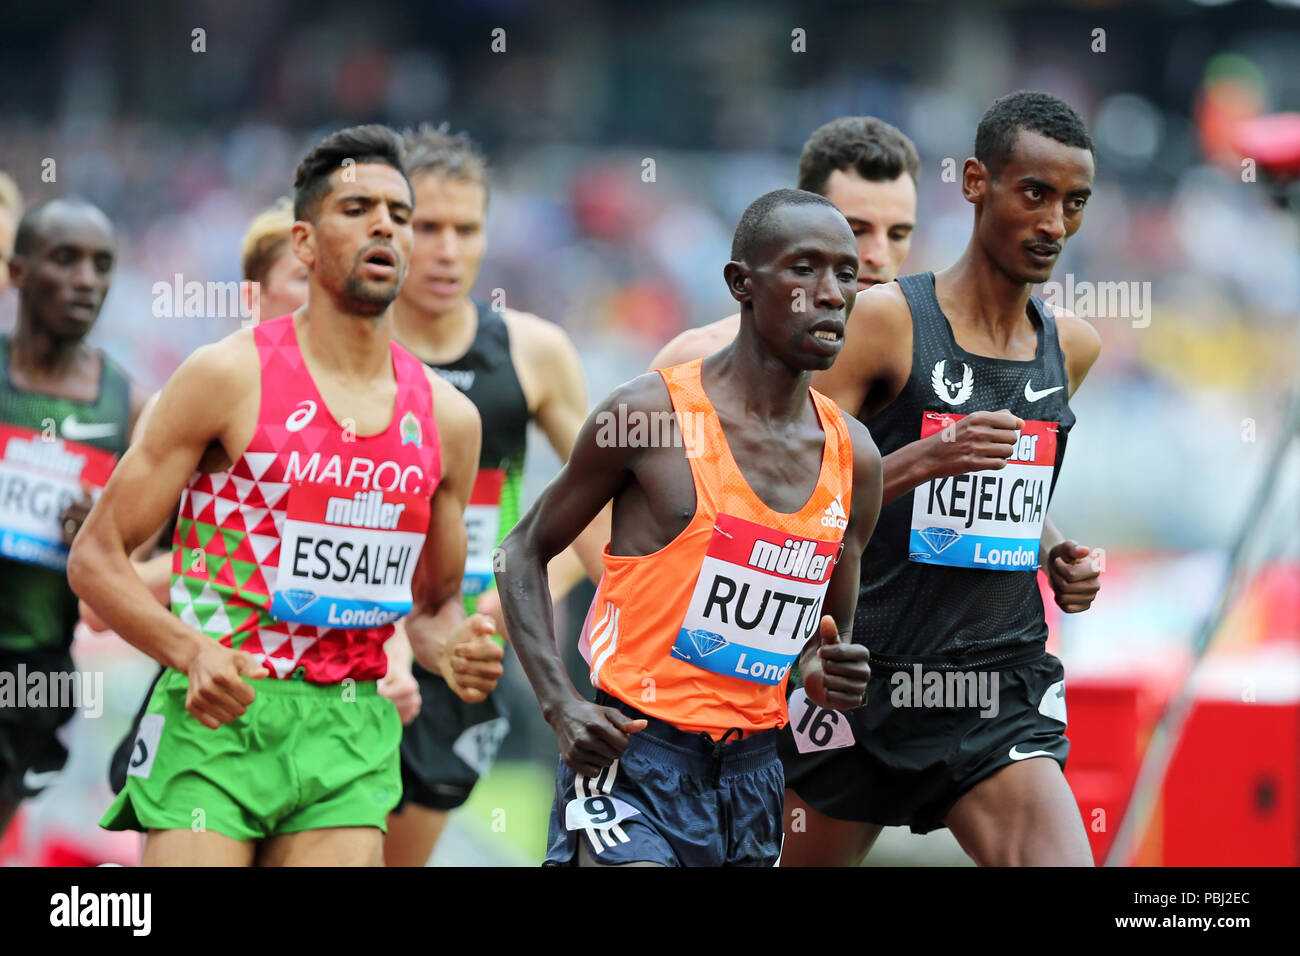 Cyrus RUTTO (Kenya), Yomif KEJELCHA (Ethiopia) competing in the Men's 5000m Final at the 2018, IAAF Diamond League, Anniversary Games, Queen Elizabeth Olympic Park, Stratford, London, UK. Stock Photo